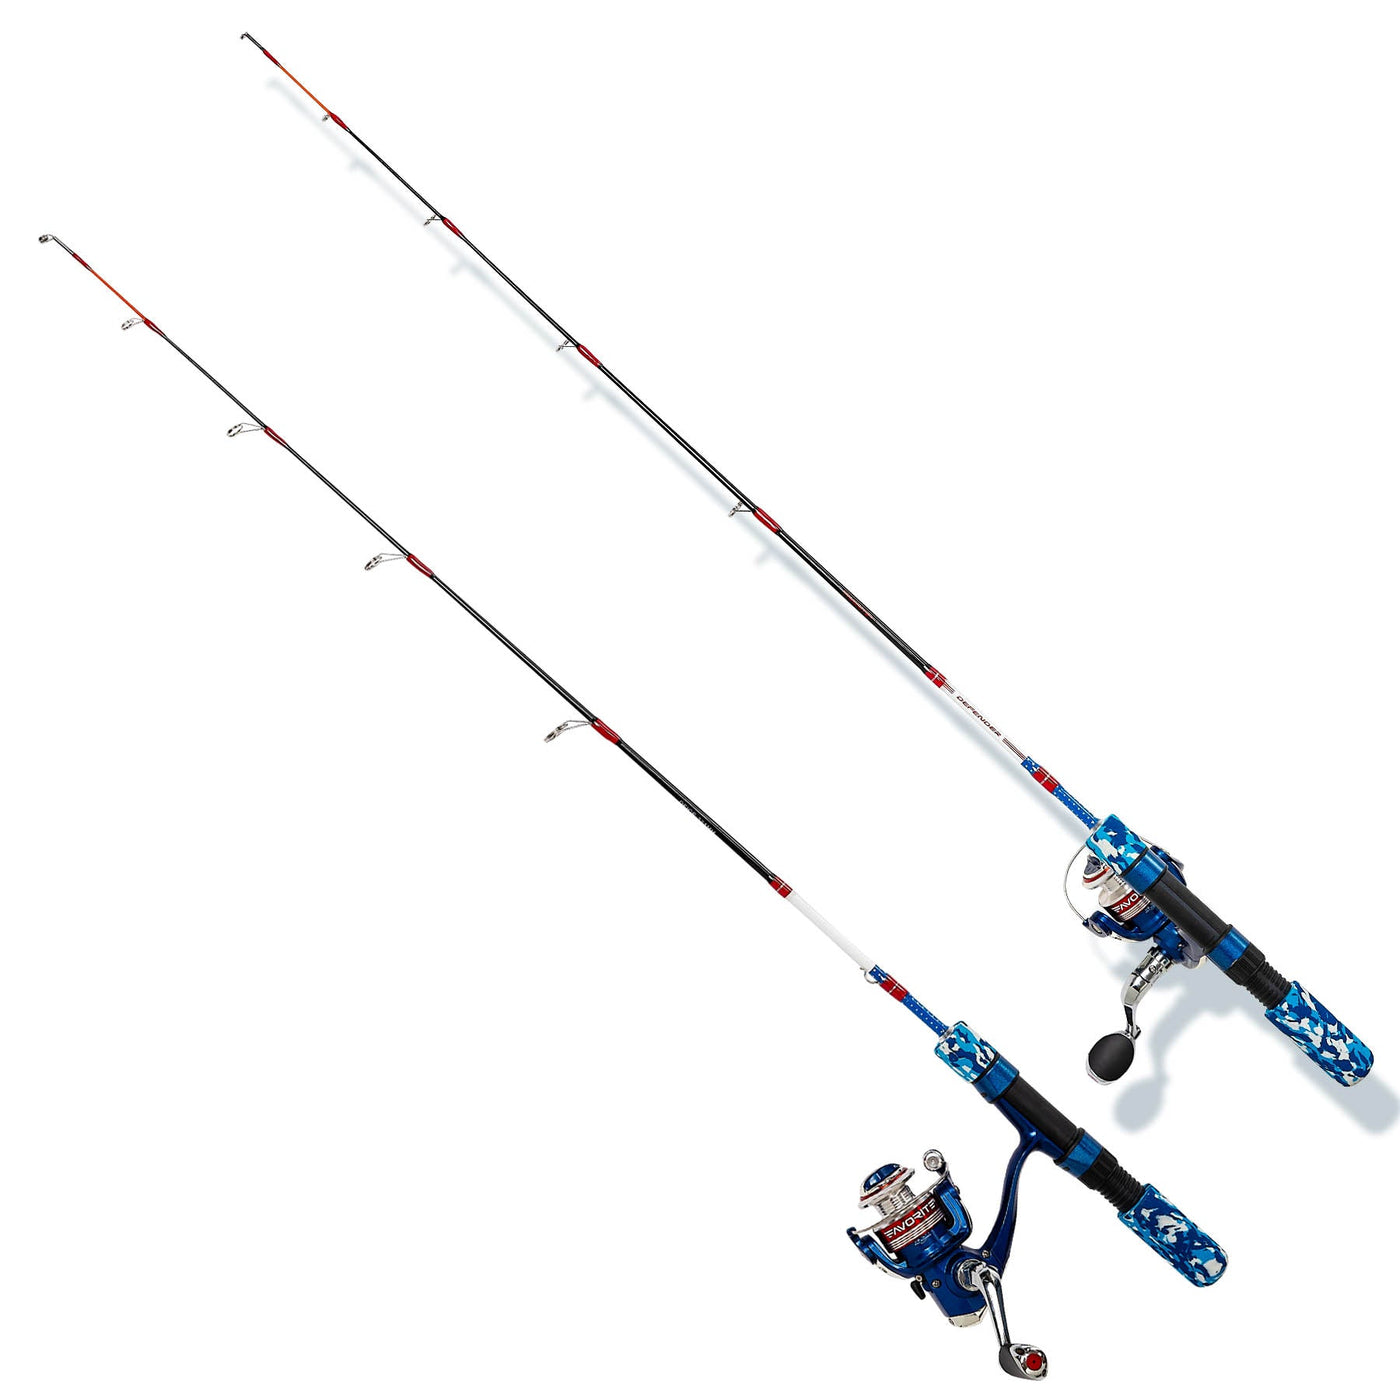 Ice fishing rods with reels up to 30, ice